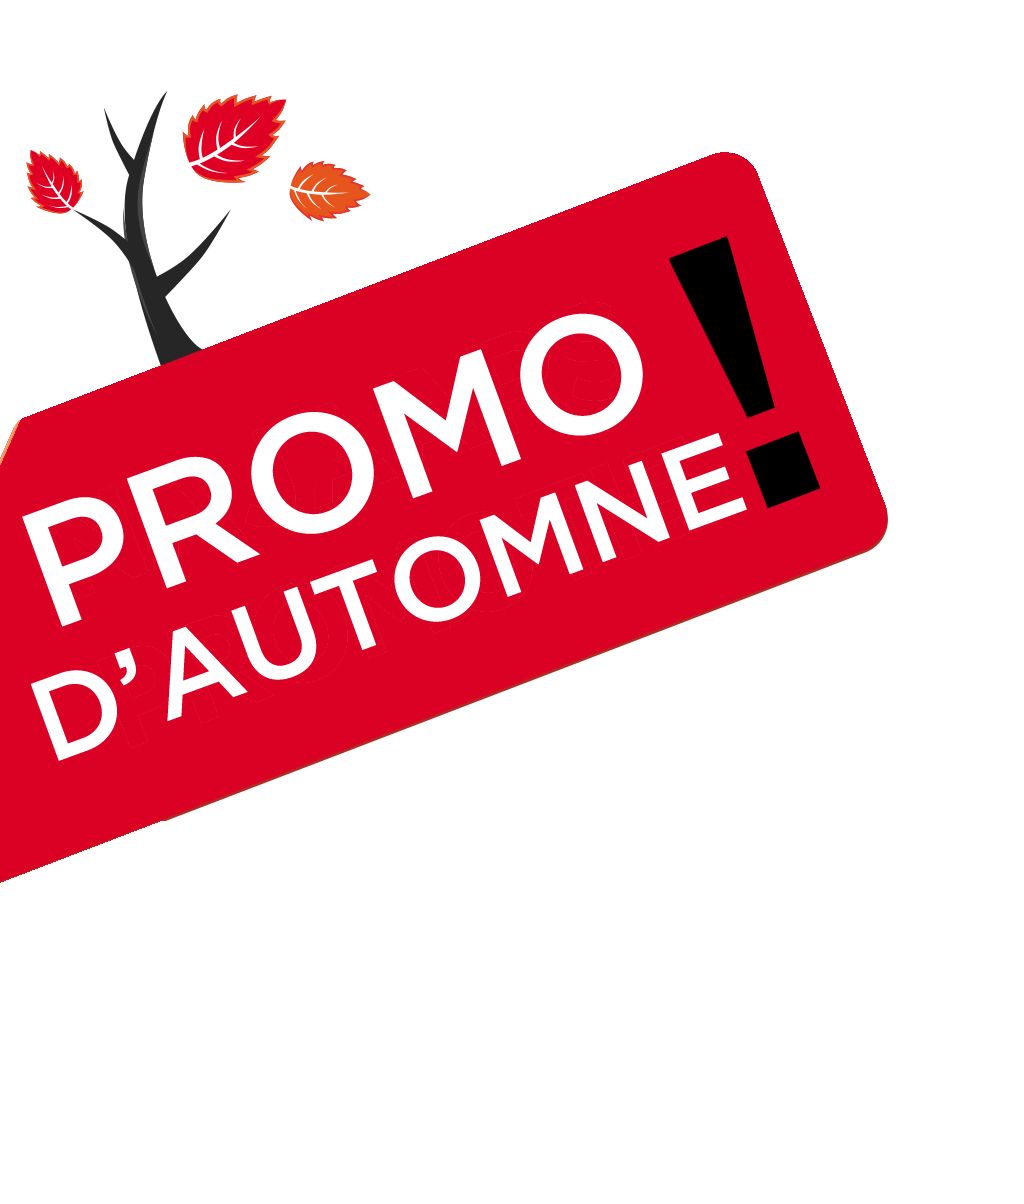 Promo AluthermoFR